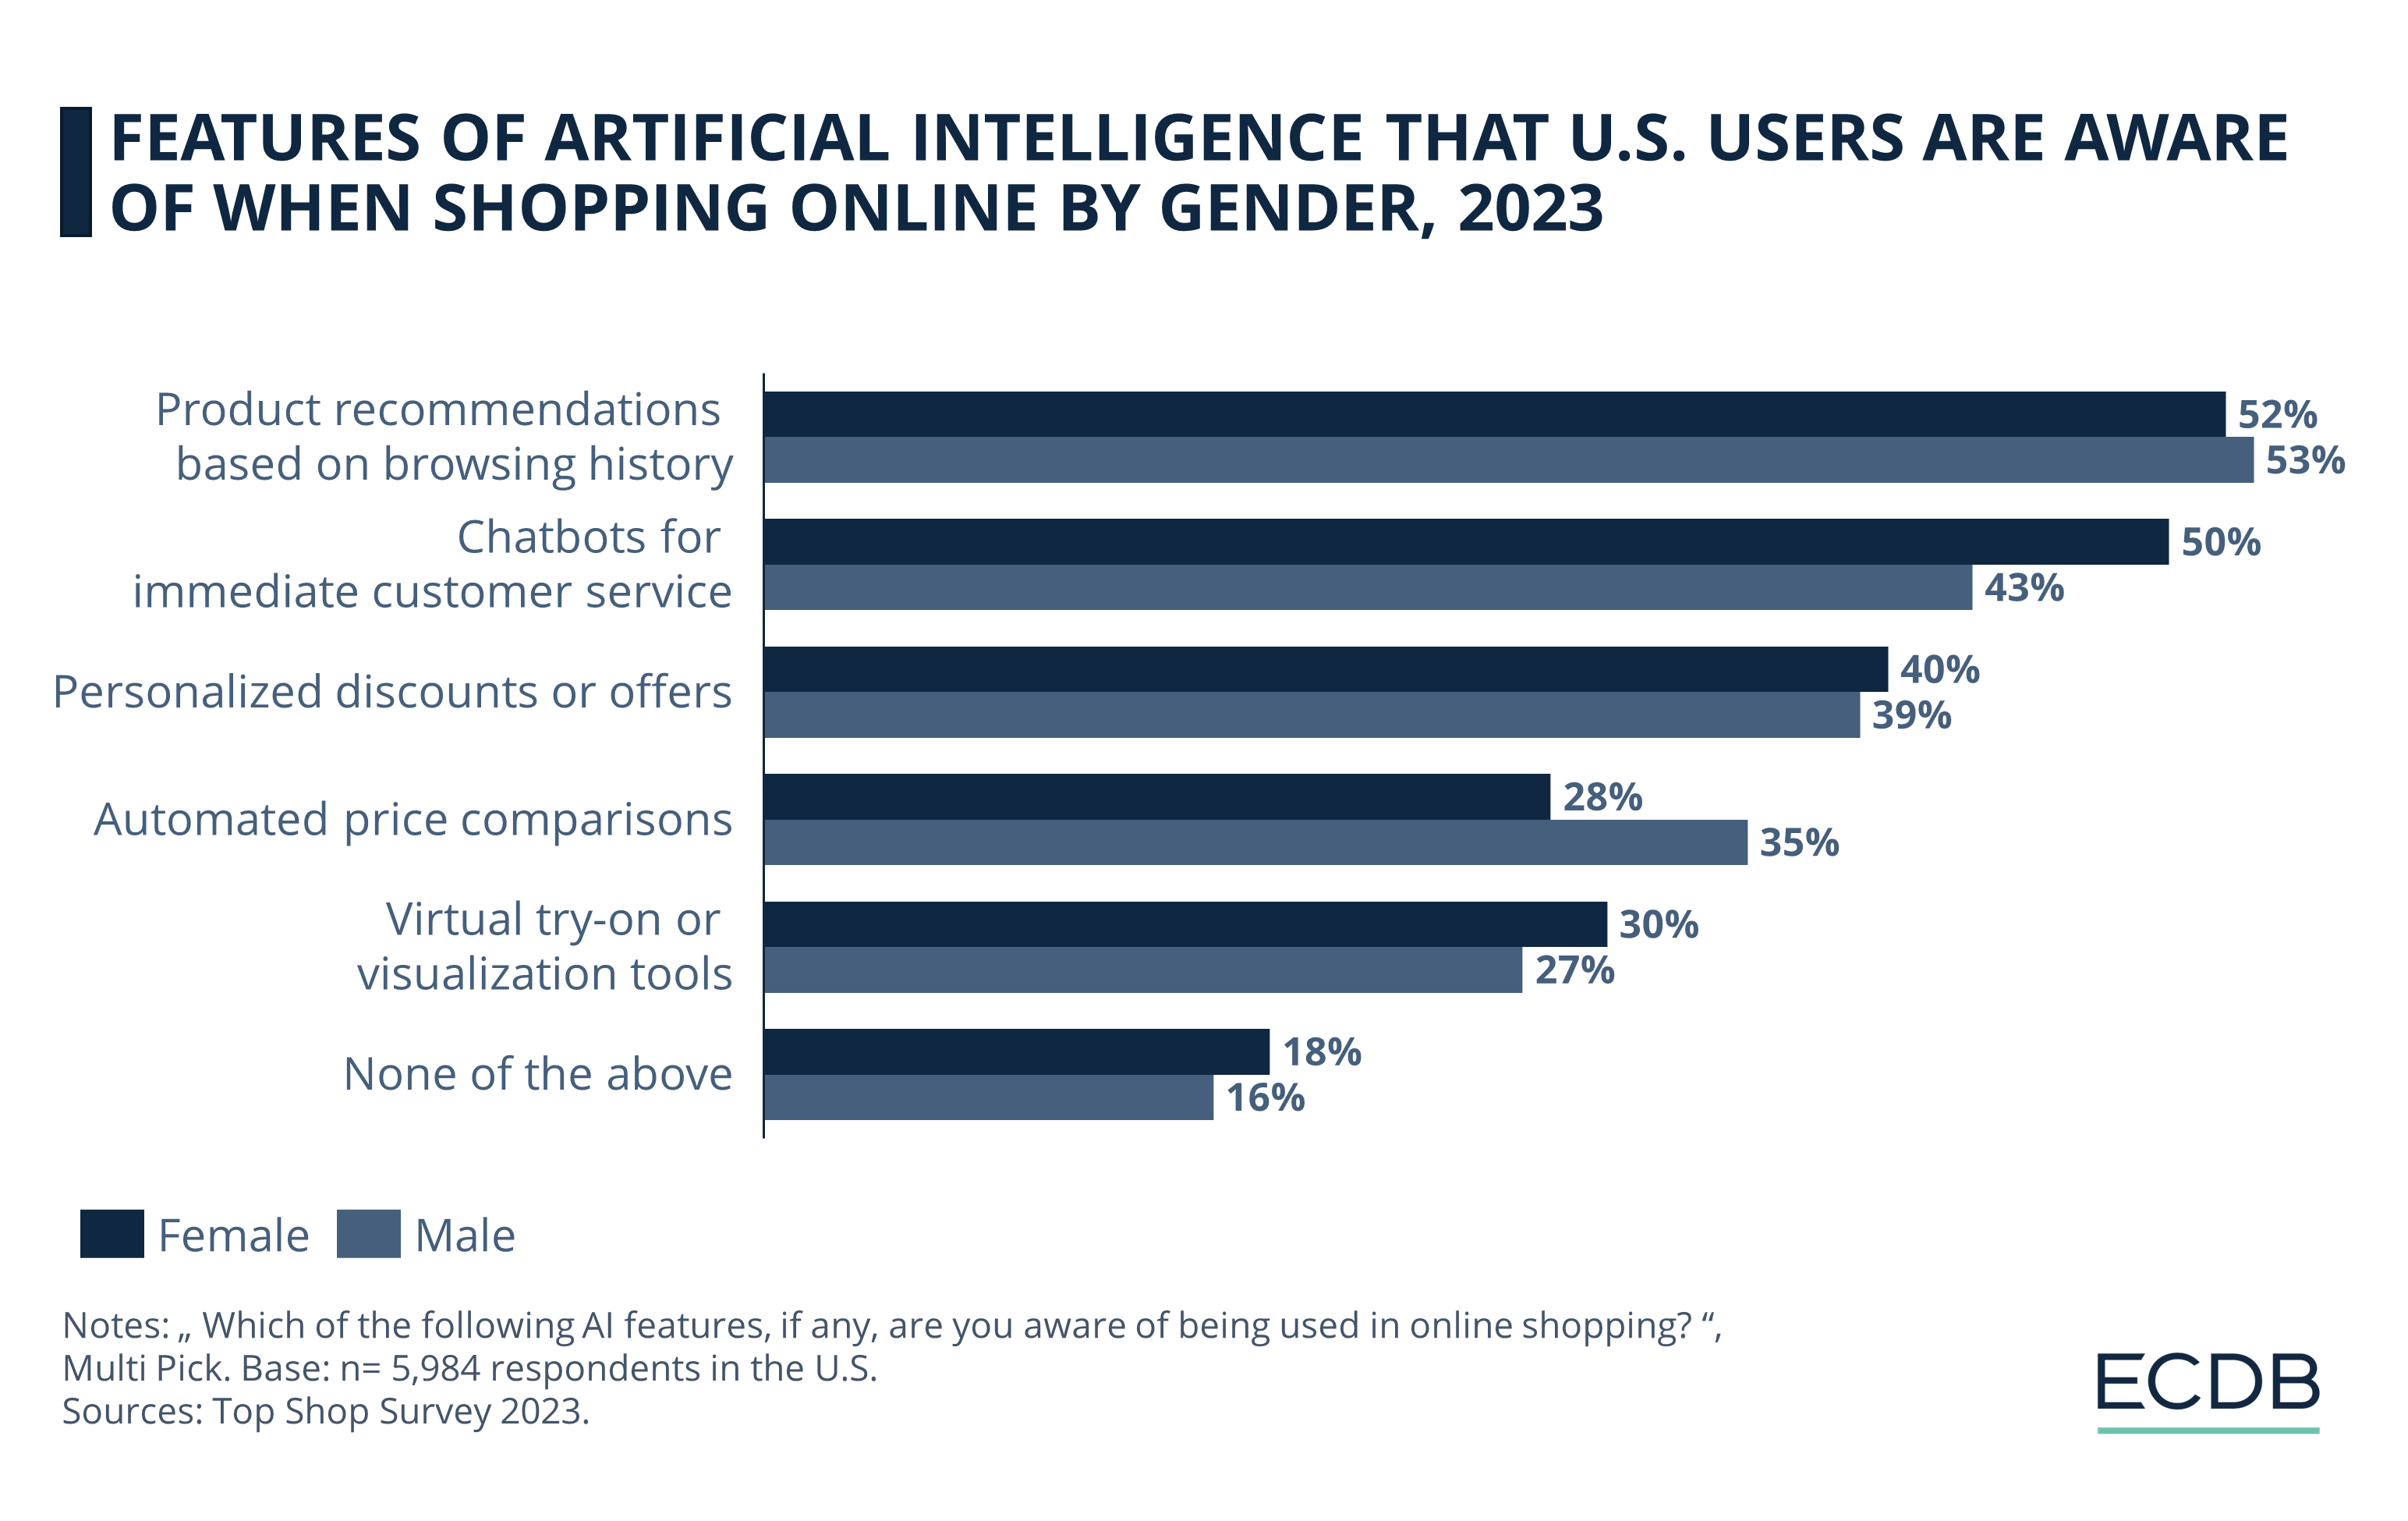 Features of AI That U.S. Users Are Aware Of When Shopping Online by Gender, 2023